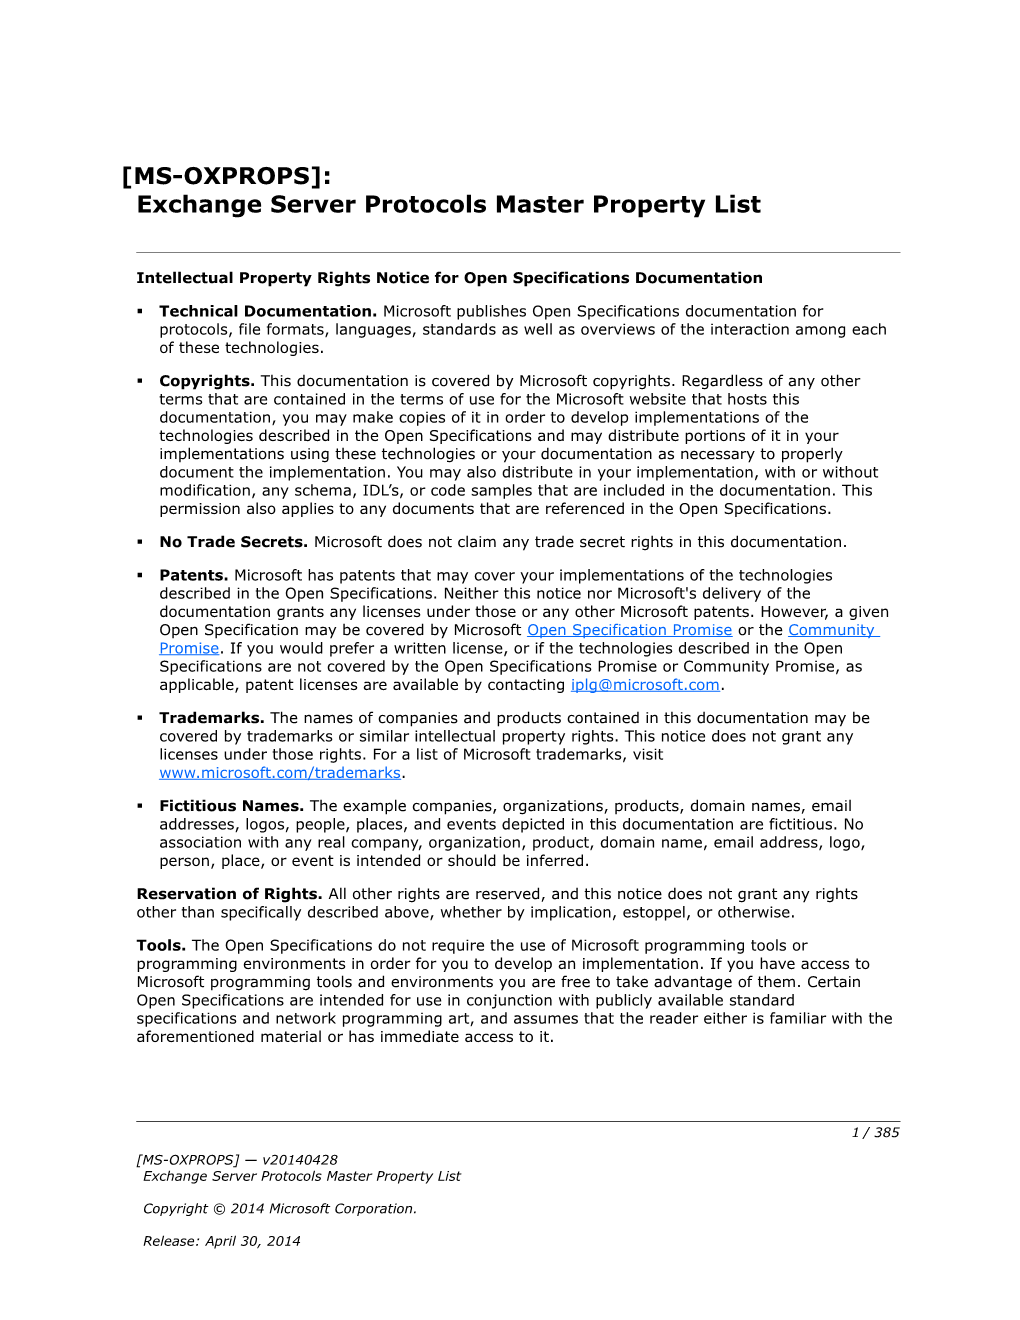 Intellectual Property Rights Notice for Open Specifications Documentation s129